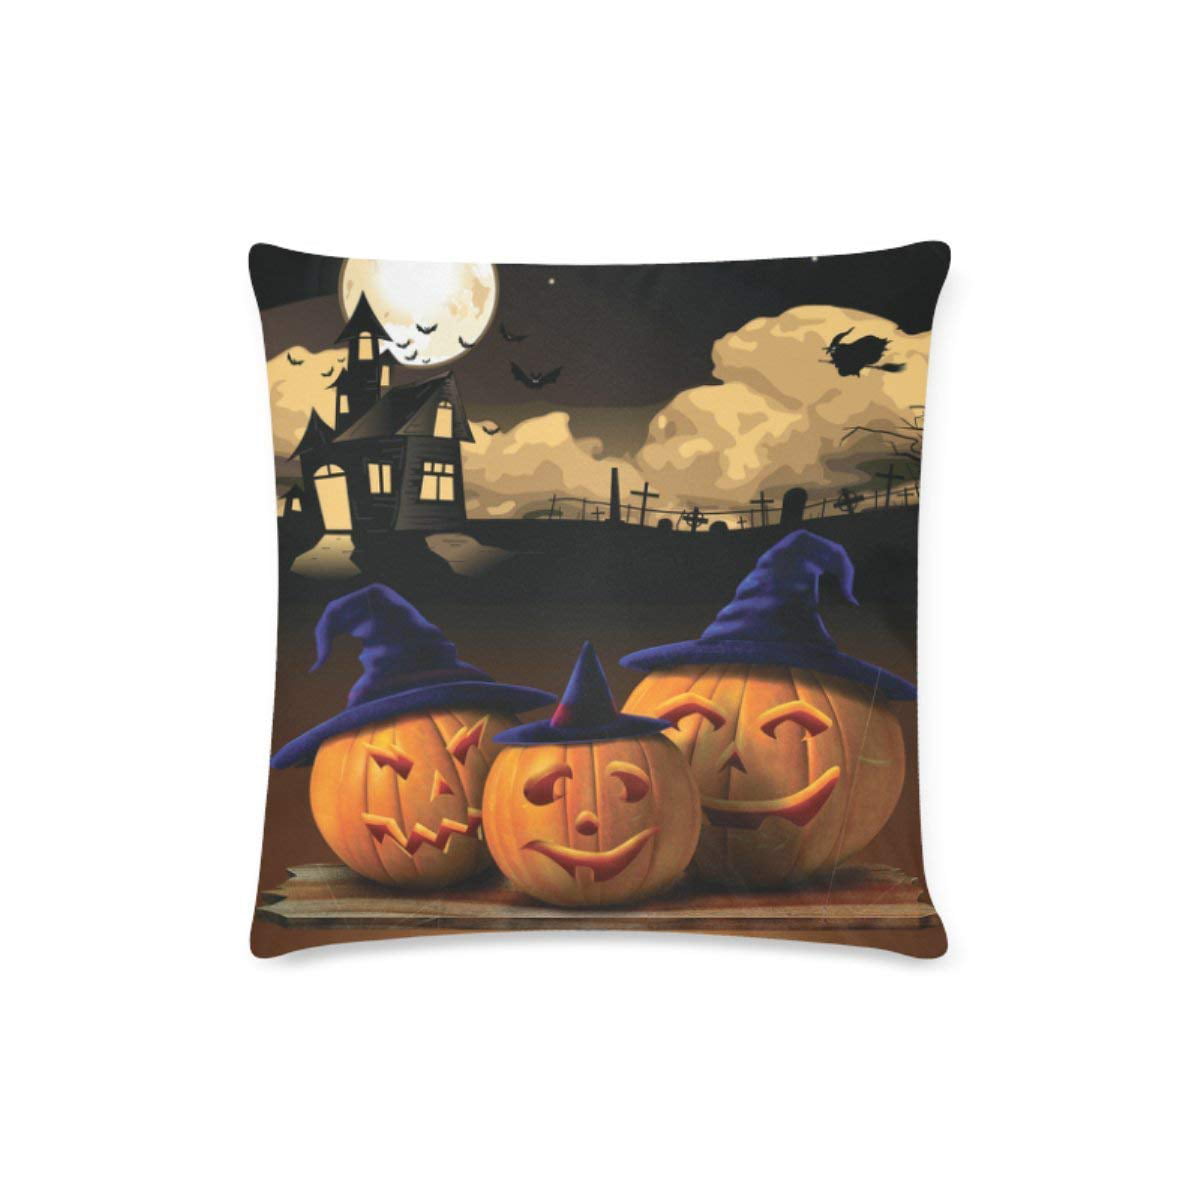 Cute & Sassy Custom Designs Halloween Pattern Ghosts Multicolor Witches & Pumpkins Throw Pillow 16x16 Bats